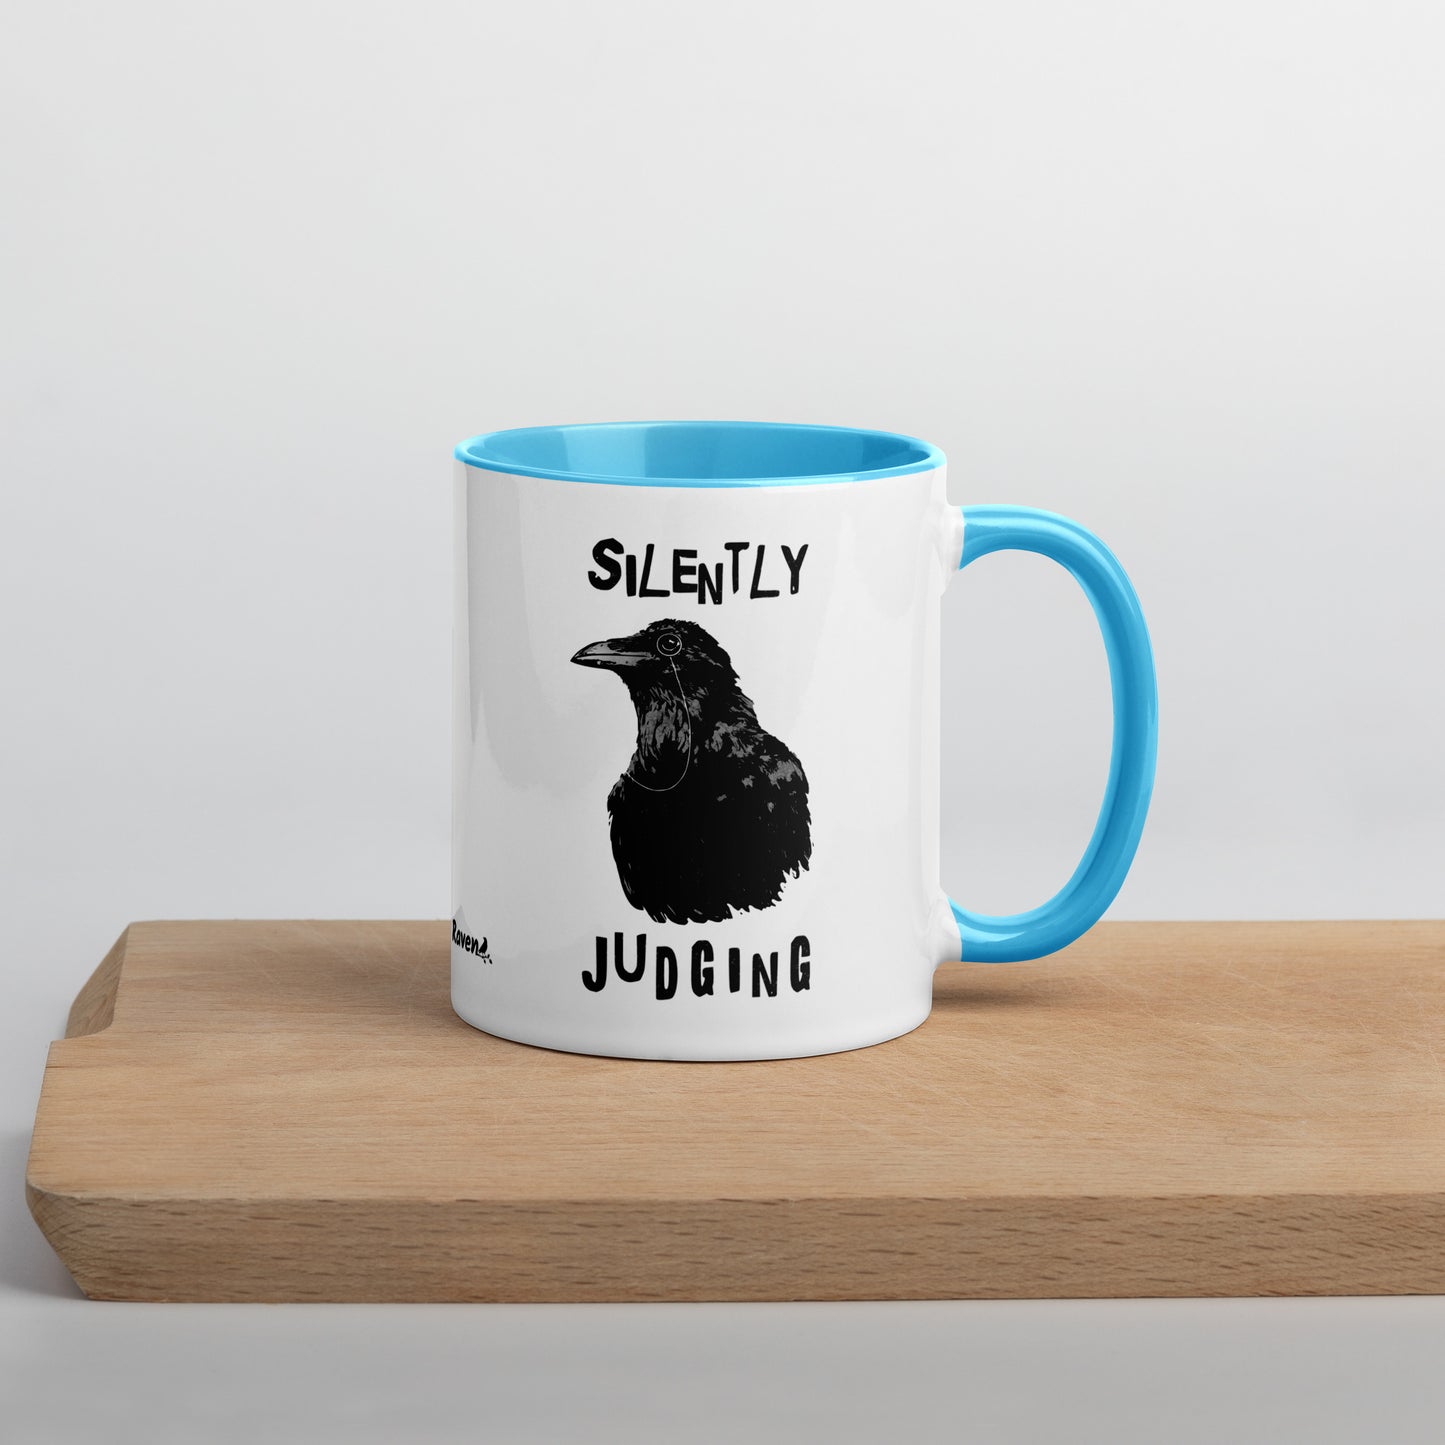 11 ounce ceramic mug with Silently Judging text surrounding a monacle-wearing crow. Double-sided design. Mug has blue rim, handle, and inside. Shown sitting on wooden cutting board with handle facing right.